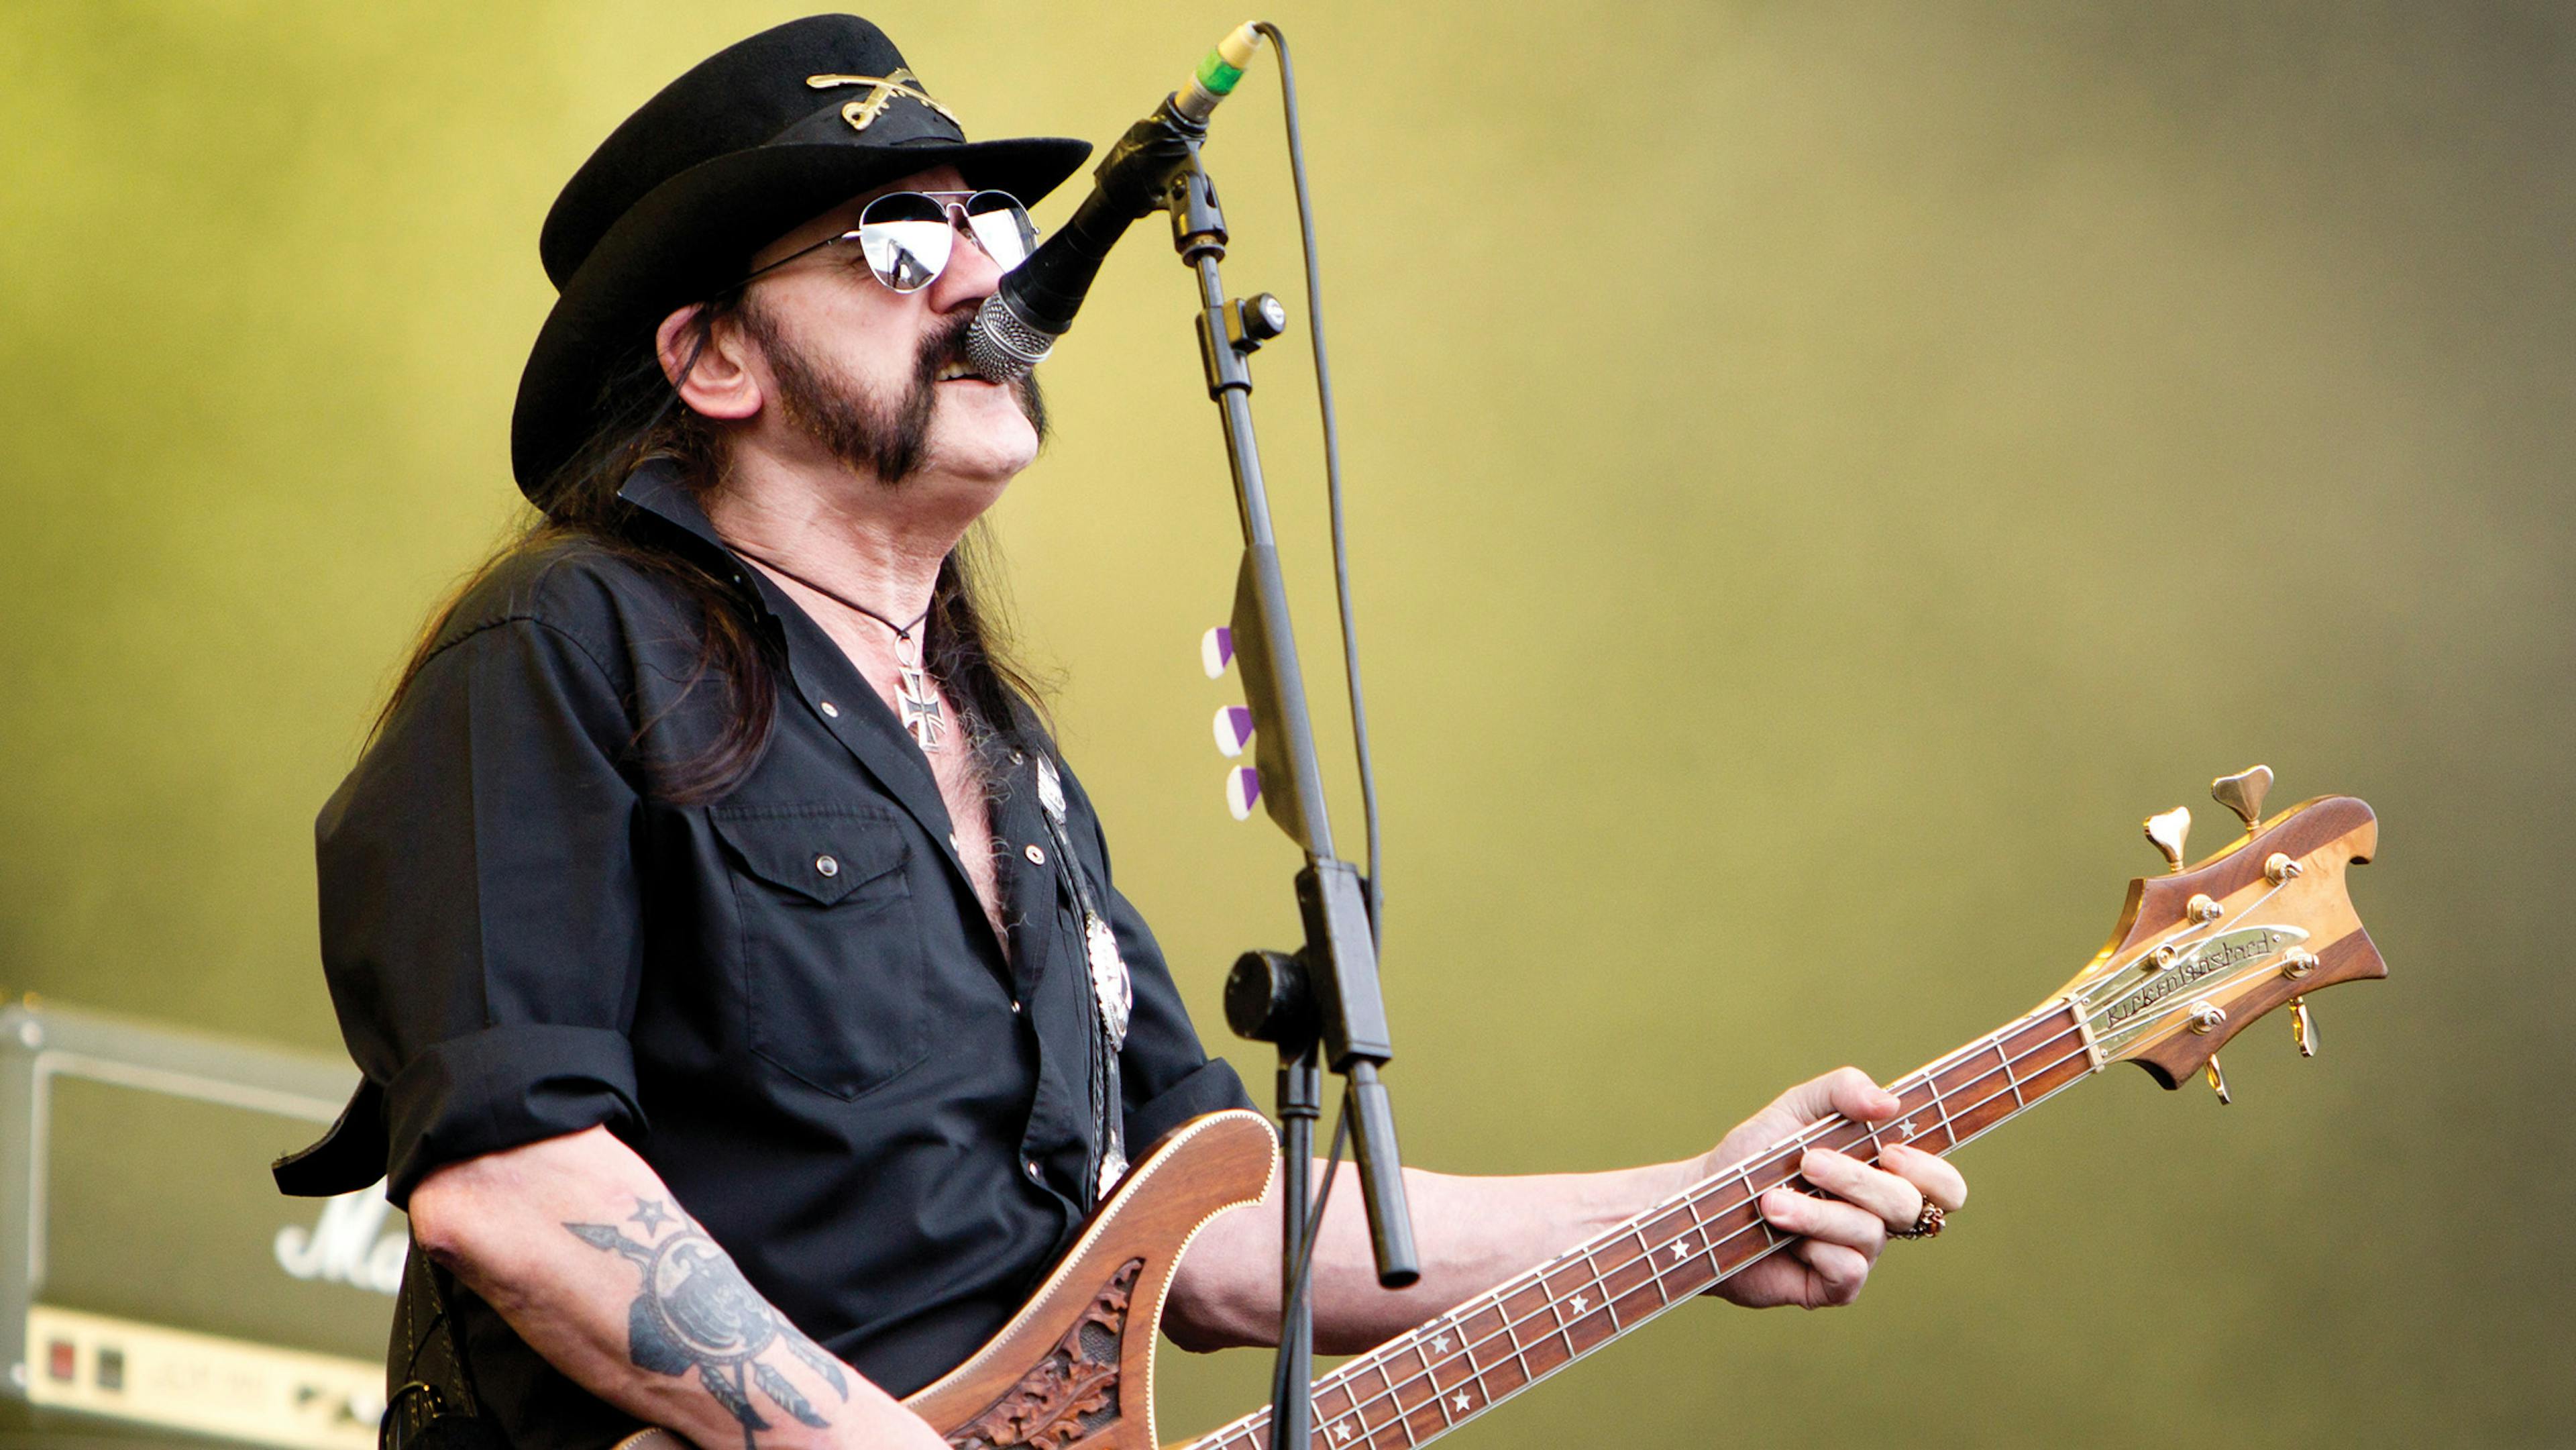 Lemmy On AC/DC In Their Early Years: “It Was Obvious They Were Going To Be Huge”